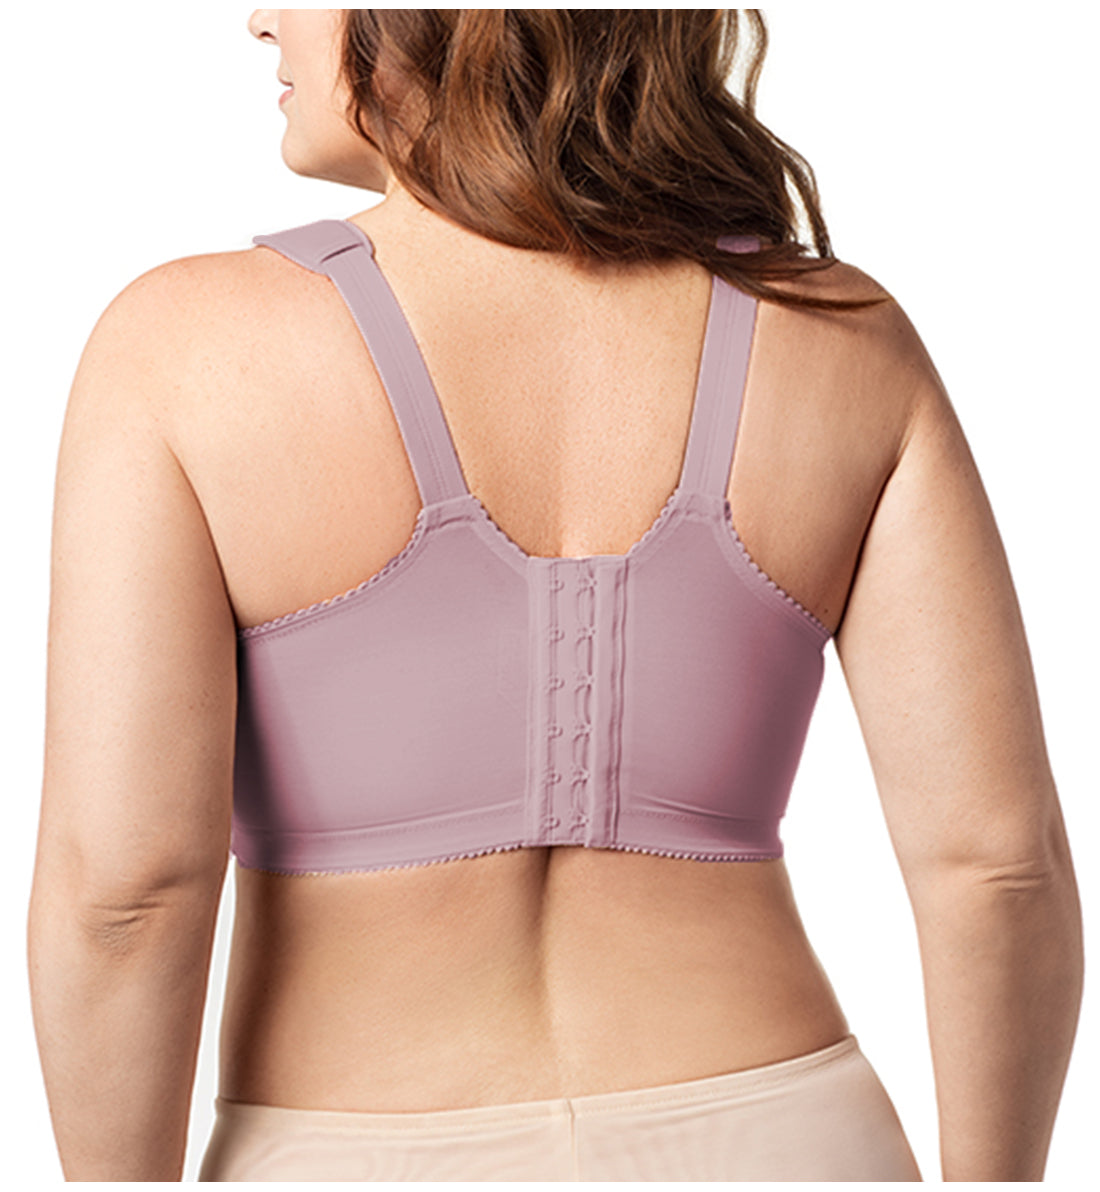 Elila Kaylee 3-Part Cup Full Support Softcup (1505),36N,Dusty Rose - Dusty Rose,36N